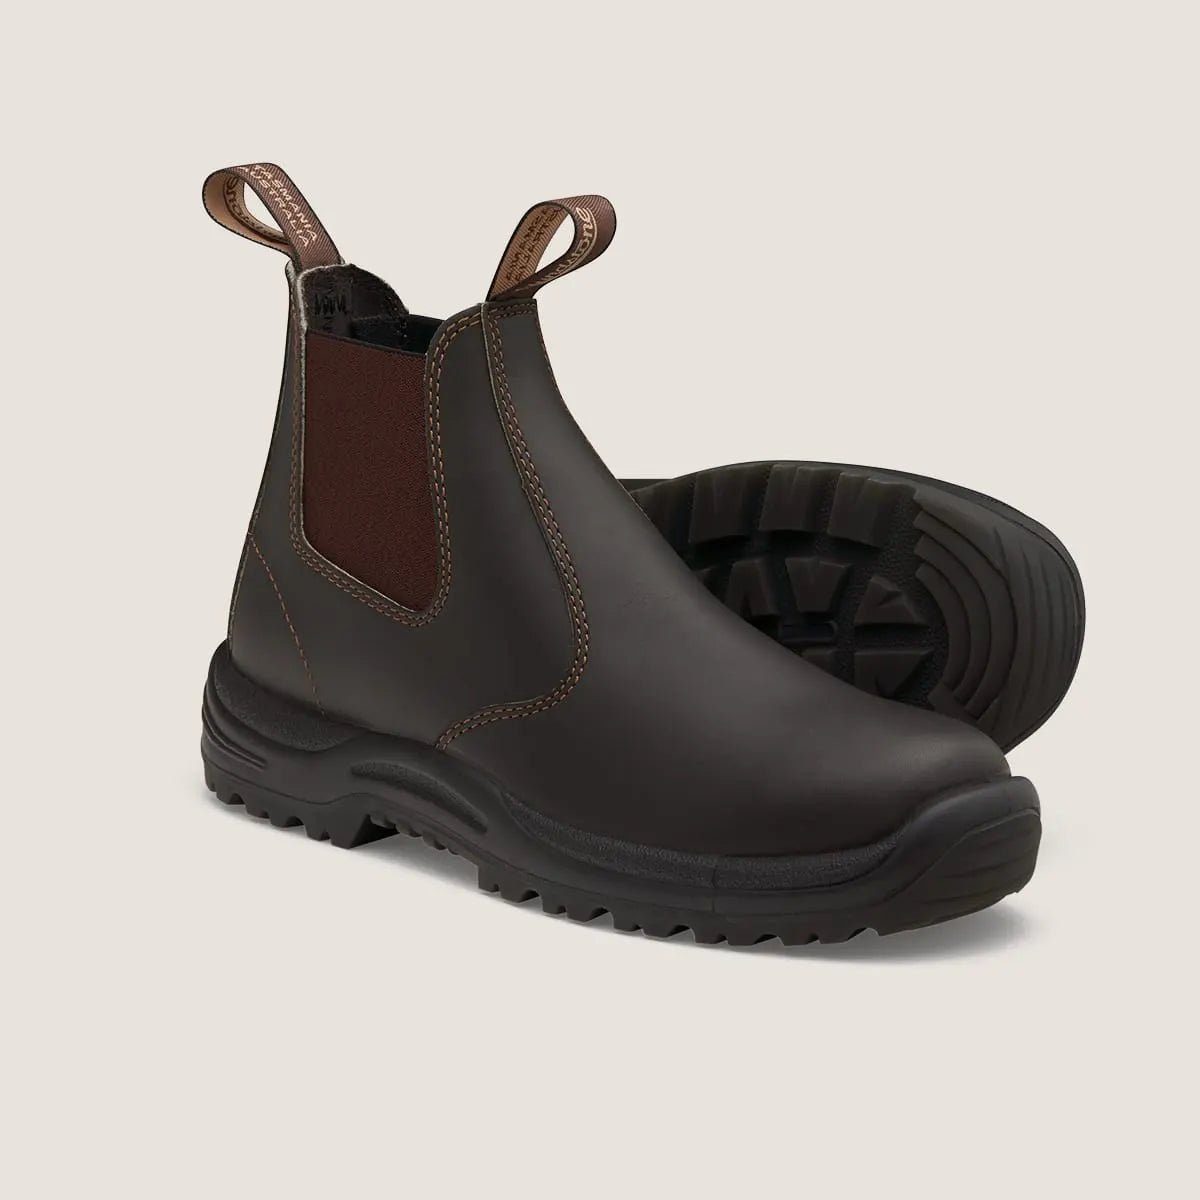 Blundstone Men's 490 Work Series Chelsea Boots - Stout Brown